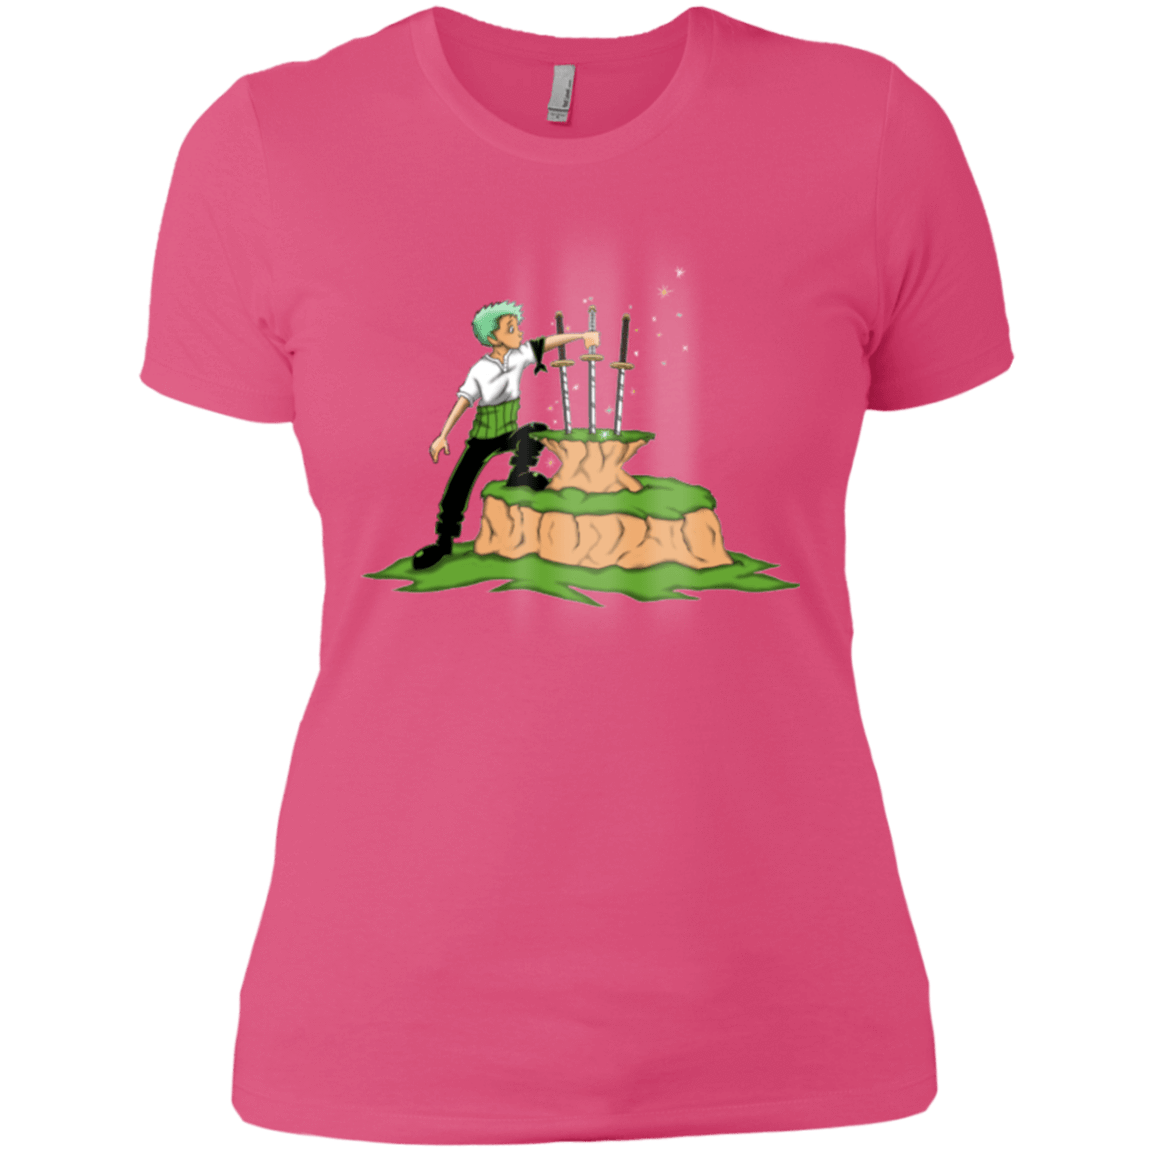 T-Shirts Hot Pink / X-Small 3 Swords in the Stone Women's Premium T-Shirt